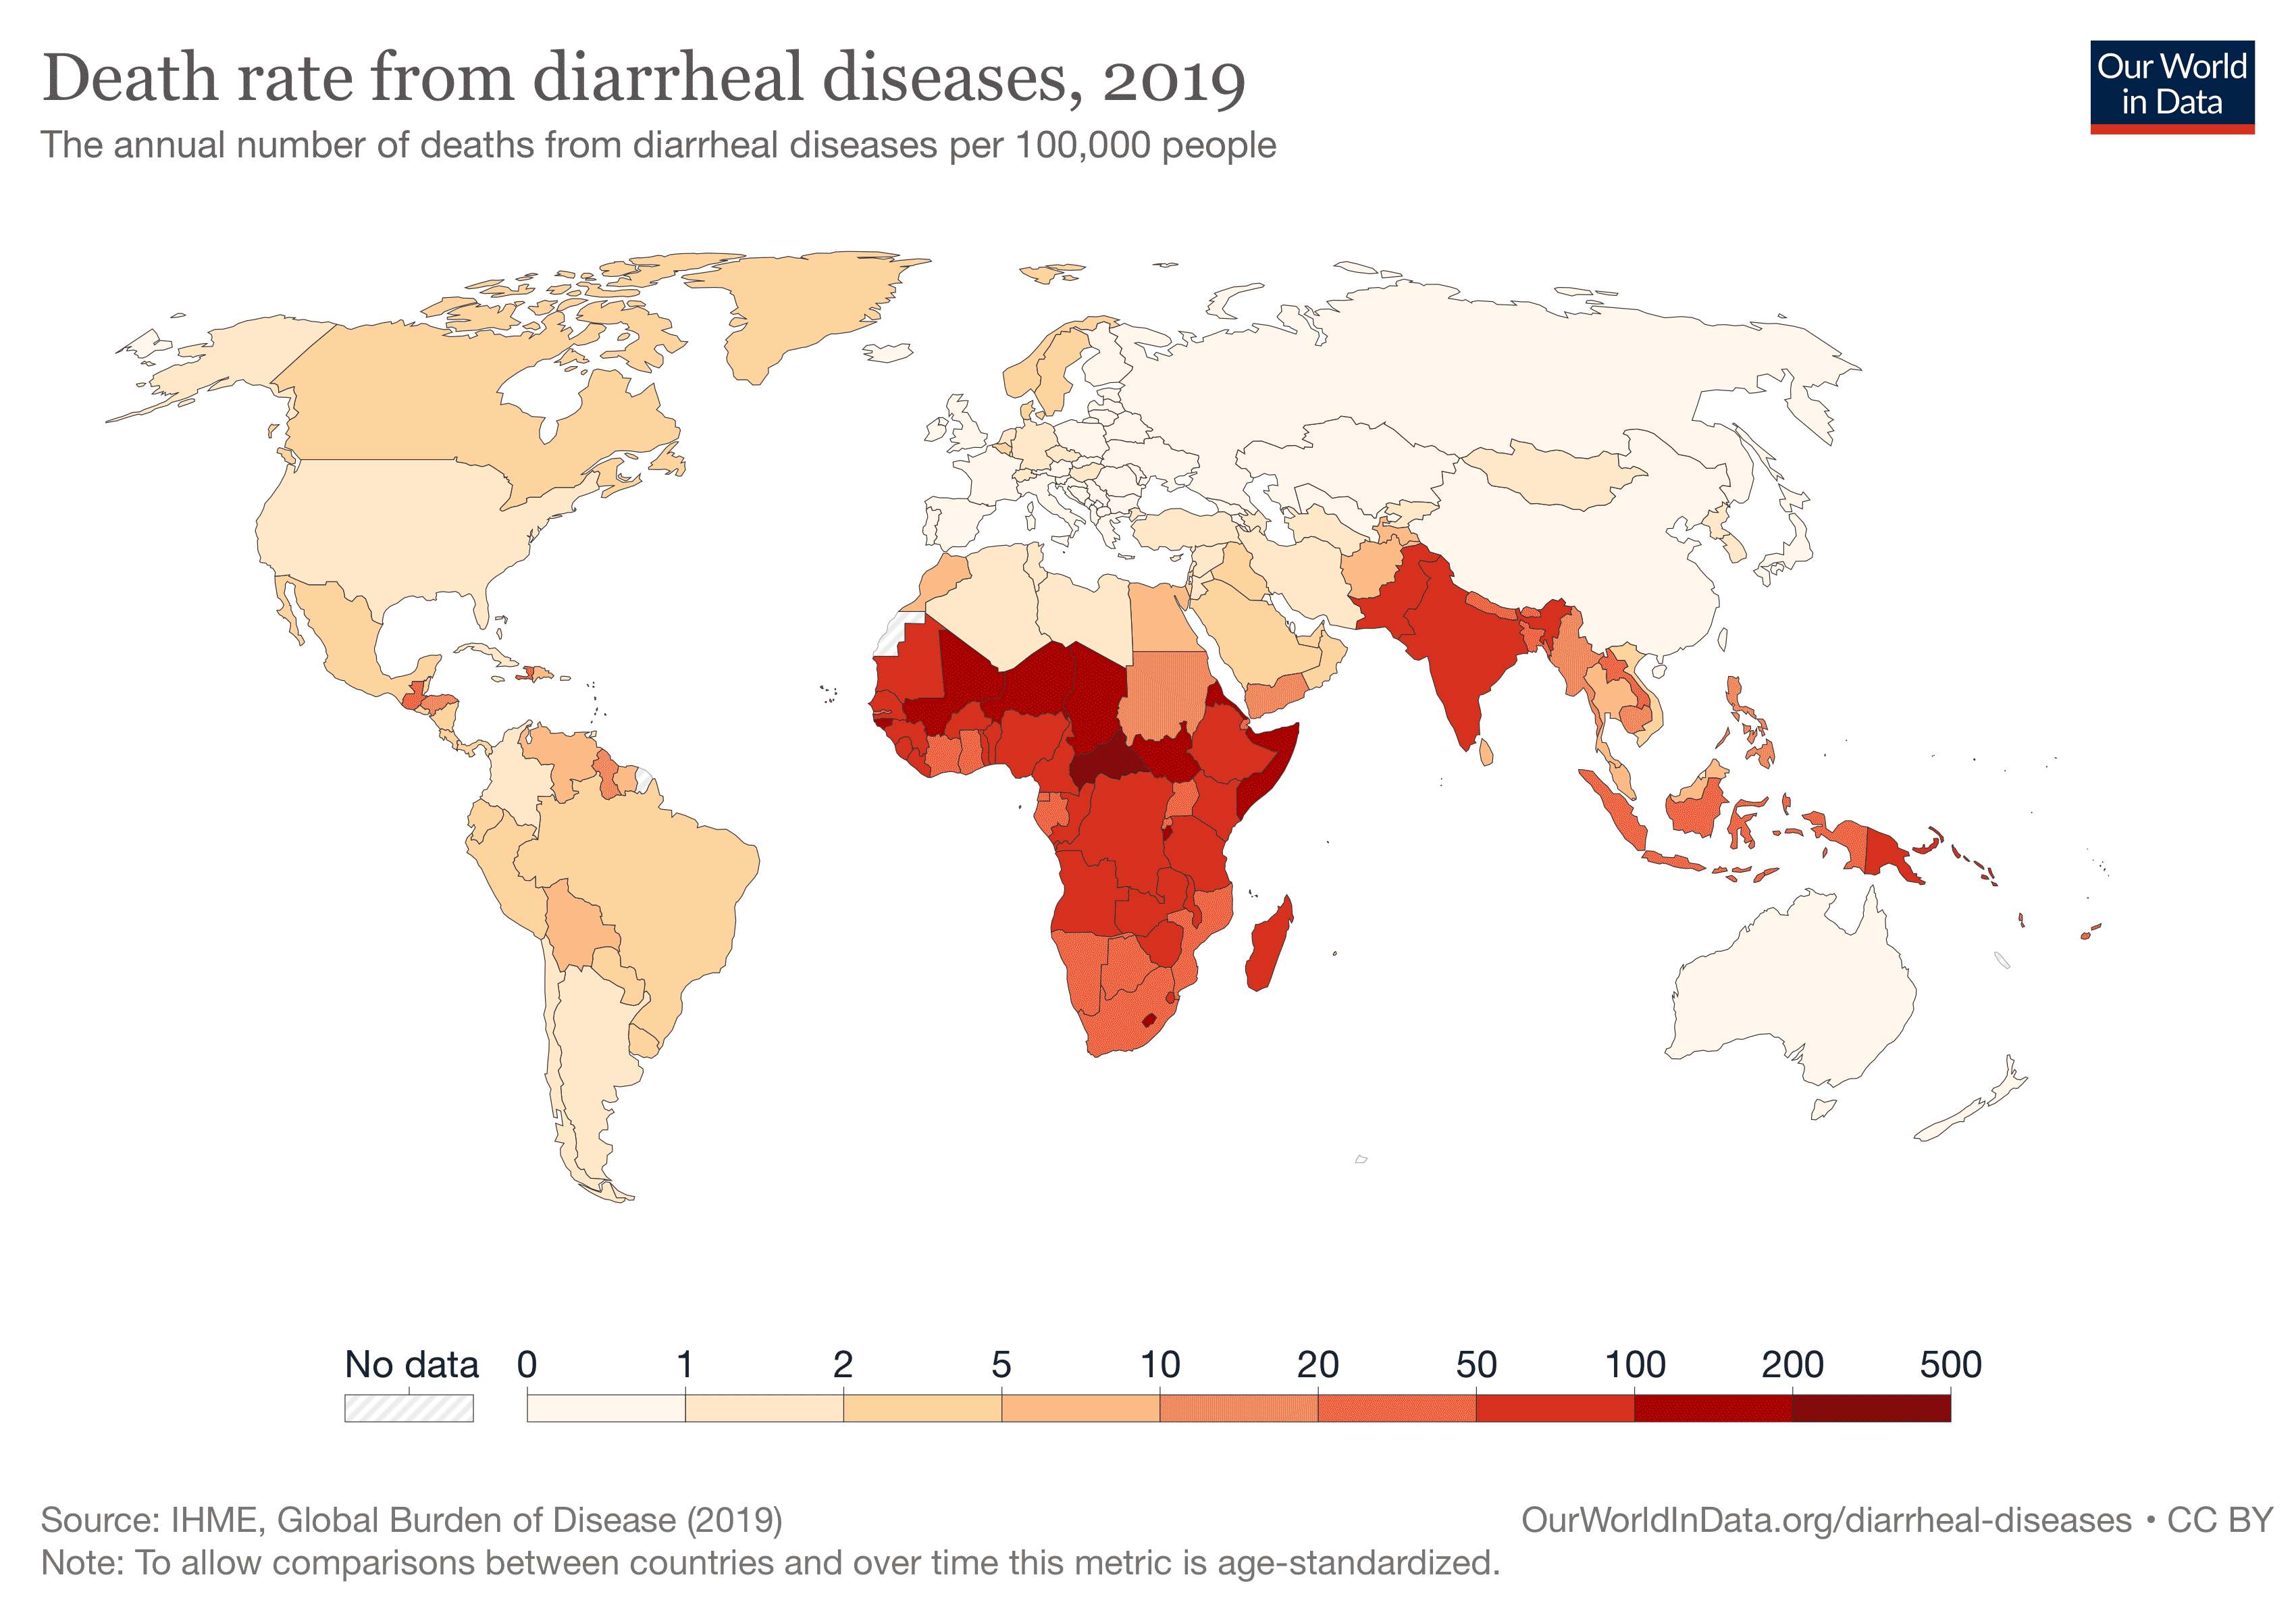 Map showing death rates from diarrheal diseases in 2019 for world countries. Much of Africa, South Asia, and Southeast Asia have high rates while other world regions are lower.